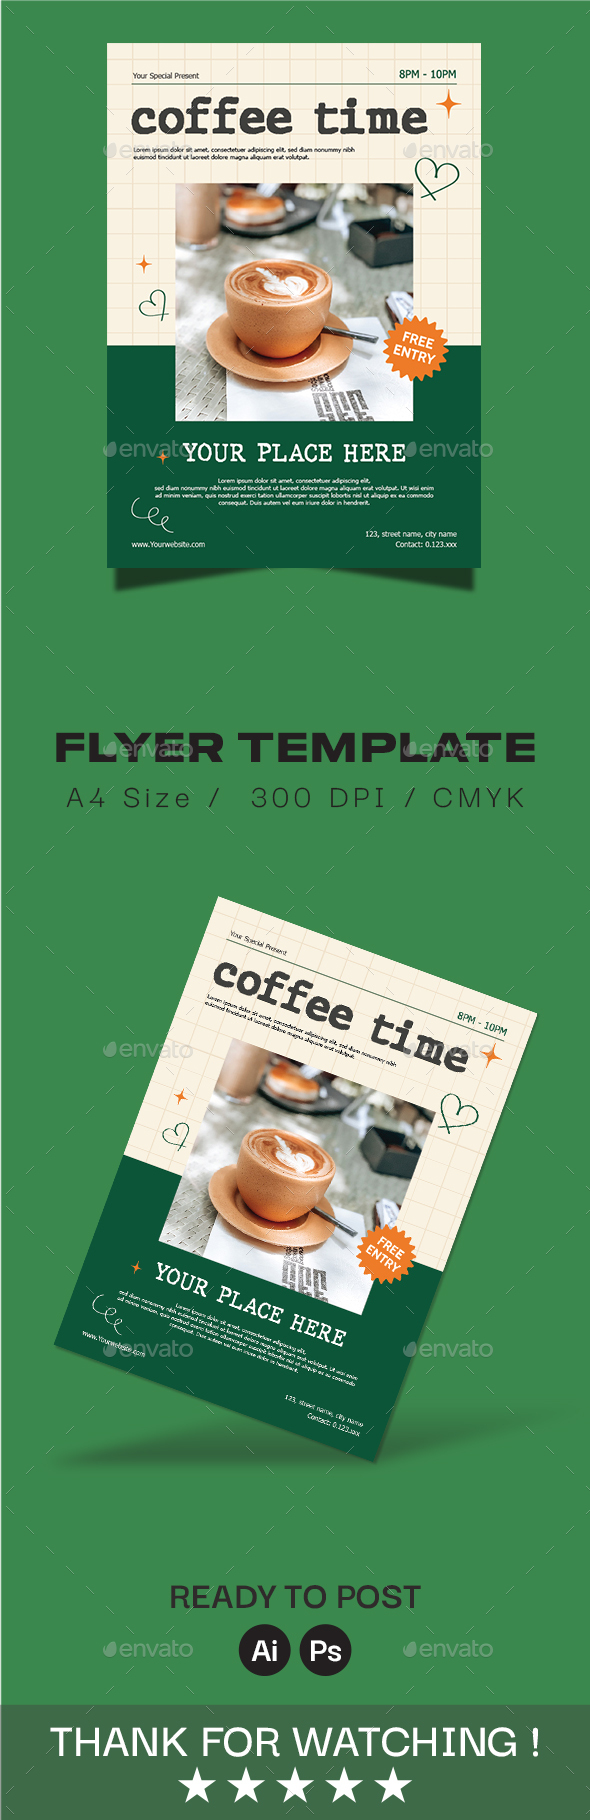 [DOWNLOAD]Coffee Flyer